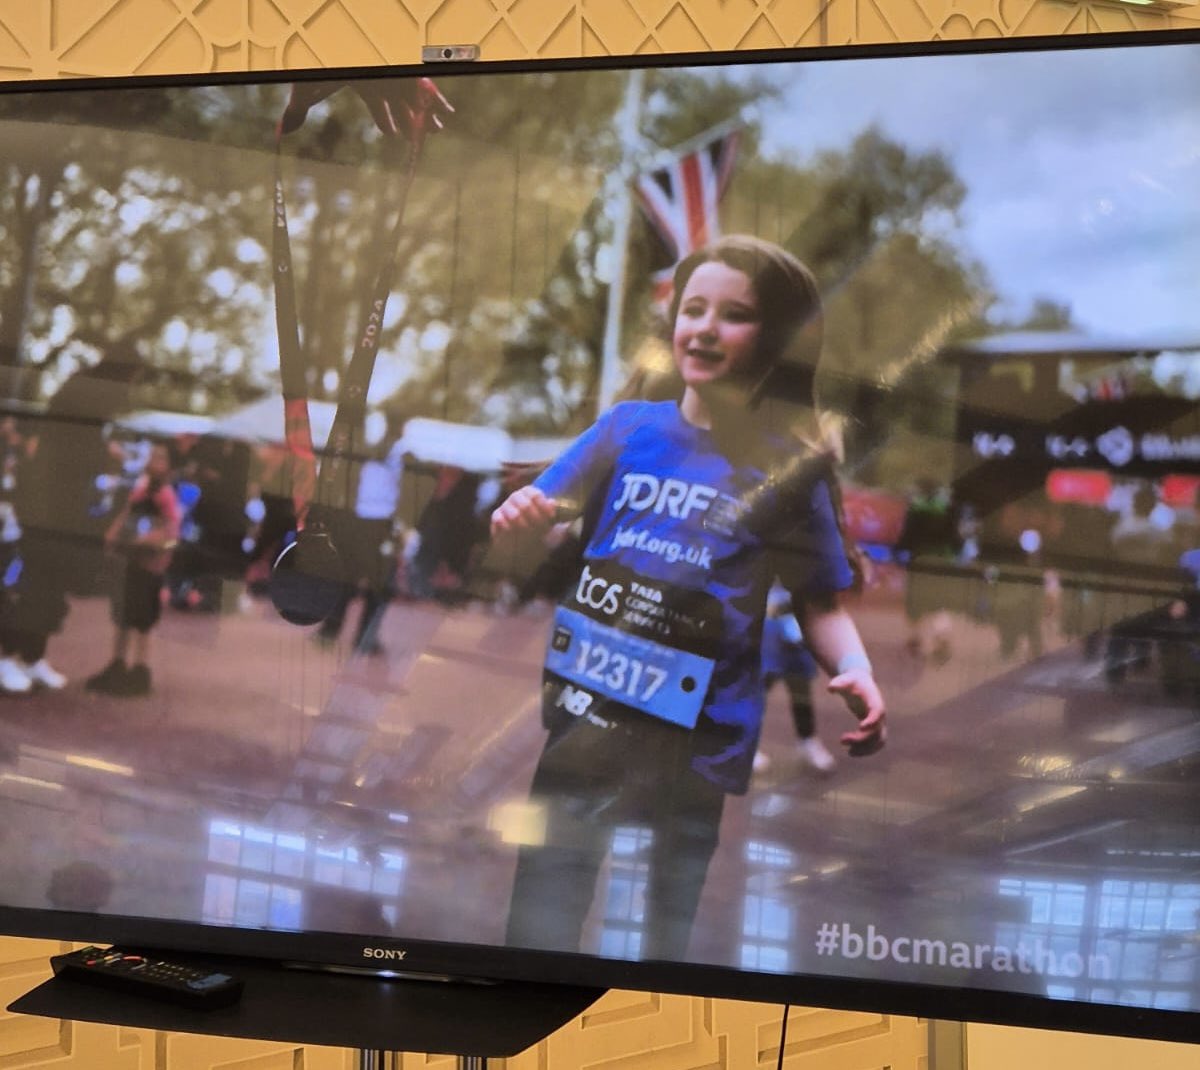 Just spotted an incredible @JDRFUK mini marathon runner on @BBCOne @LondonMarathon coverage #hero #londonmarathon2024 raising funds to cure #t1d